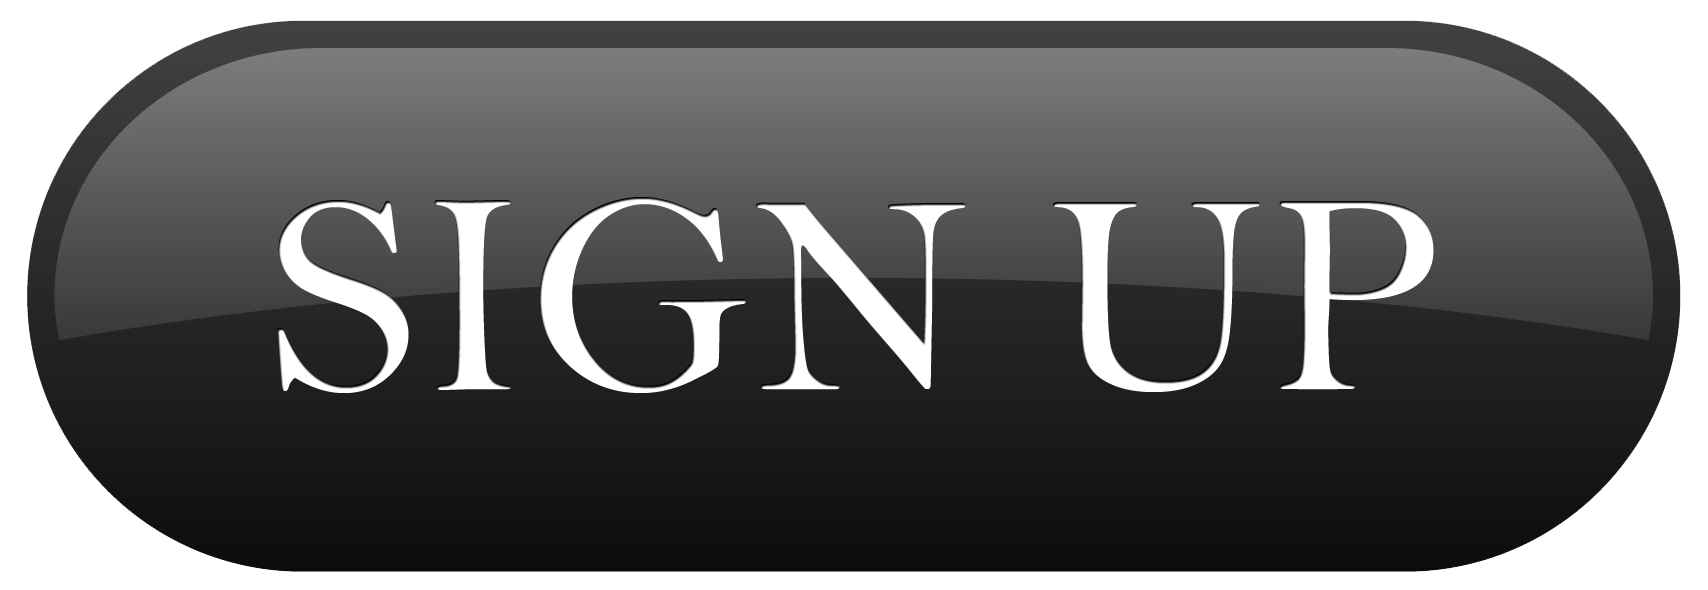 Sign in s sign up. Sign up. Up знак. Кнопка PNG. Sign up иконка.